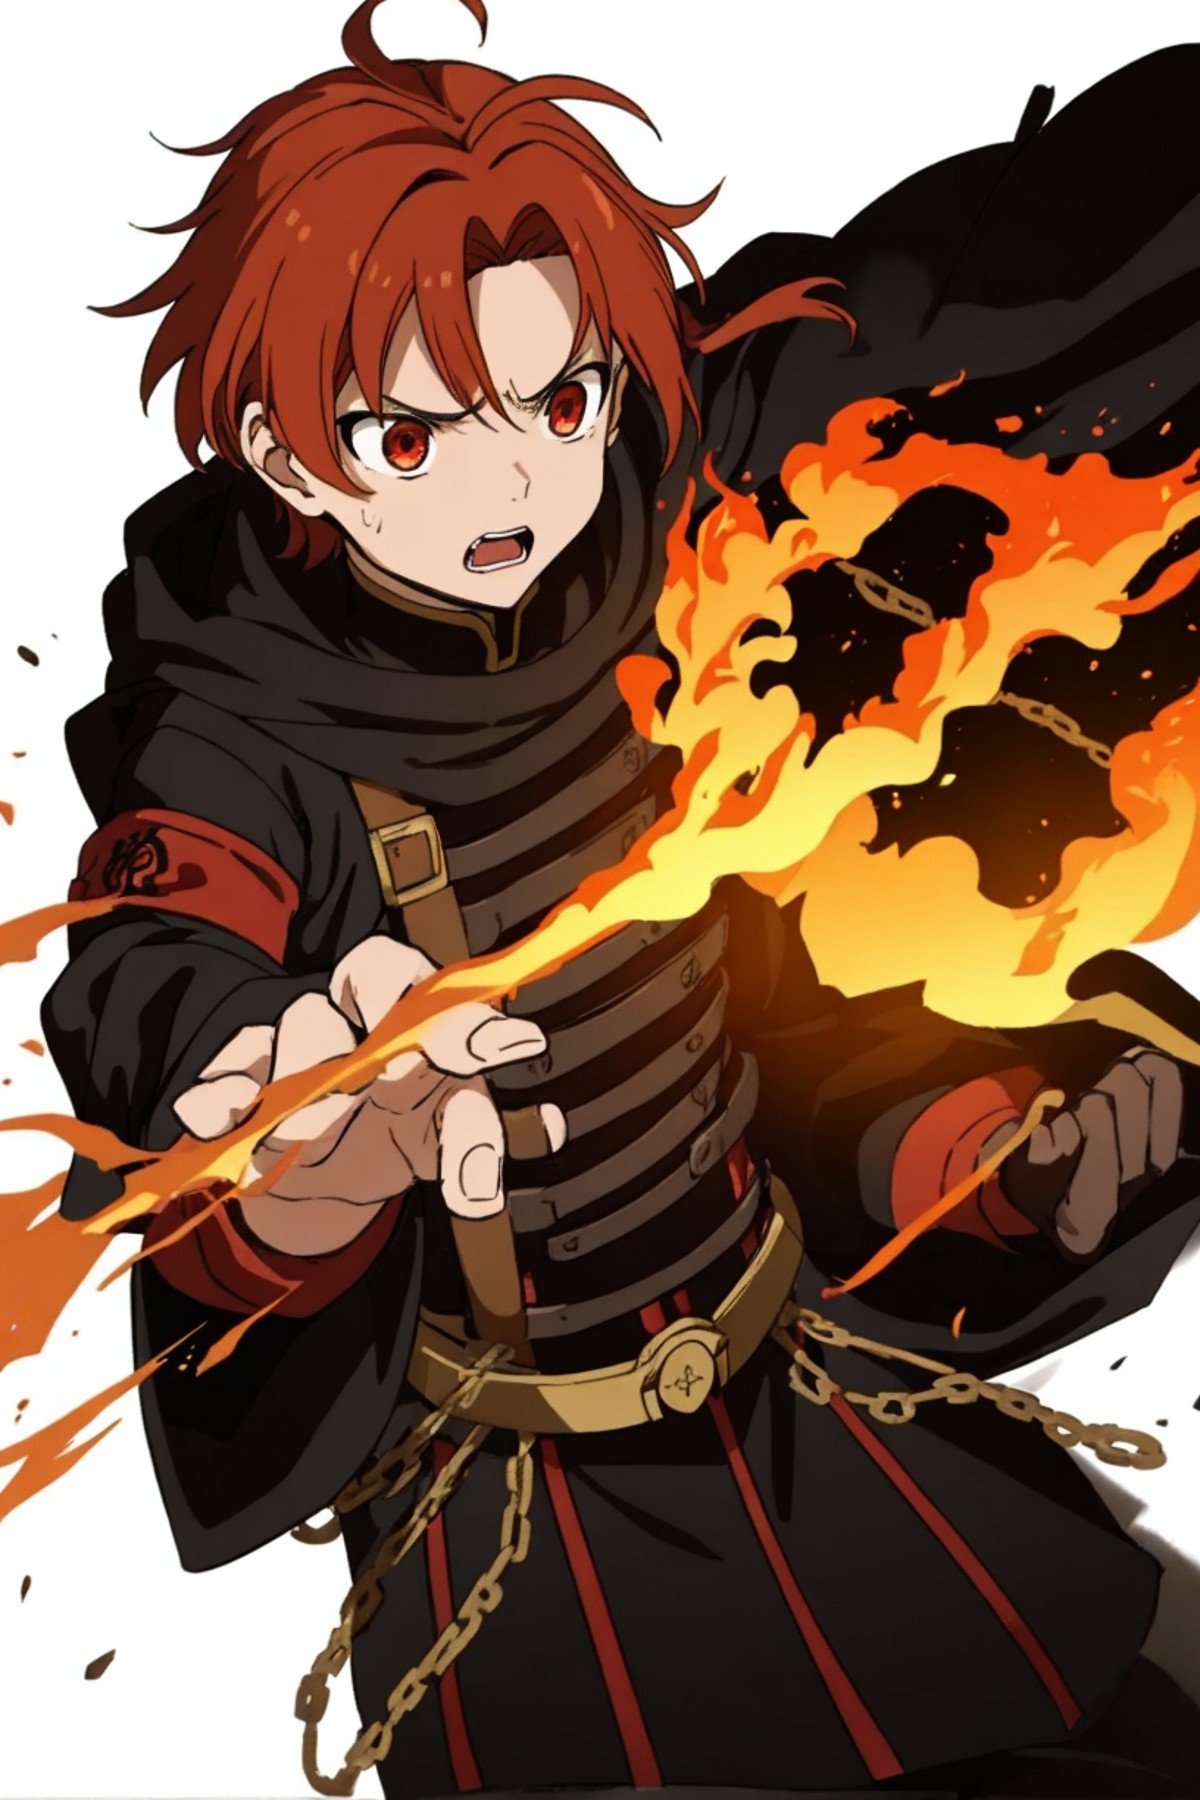 1 boy, rudeus, anime boy, anime, boy, masterpiece, full body, ultra-detailed, black and red hair, windy hair, long hair,(angry:1.8), (crying:2.0), rage, sad, black hoodie, fire magic, necklace, broken gem, chains around, chains shield, (tears:2.4), black gloves, raised eyebrows, (screaming:1.6), power blast, fire energy, true power, true form, evolution, fire aura, fire shield, (red eyes:2.5), jitome, night burnt forest scene, solo, UHD, super detail, forest in ashes, combat, sunset, fire particles, ashes, red and dark colors, ((masterpiece)), revenge, Negative prompt: (worst quality, low quality, extra digits:1.4), negative_hand-neg, EasyNegativeV2,   Steps: 25, Sampler: DPM++ 2M SDE Karras, CFG scale: 7.5, Seed: 25, Size: 512x768, Model: seizamix_v2, Clip skip: 1,